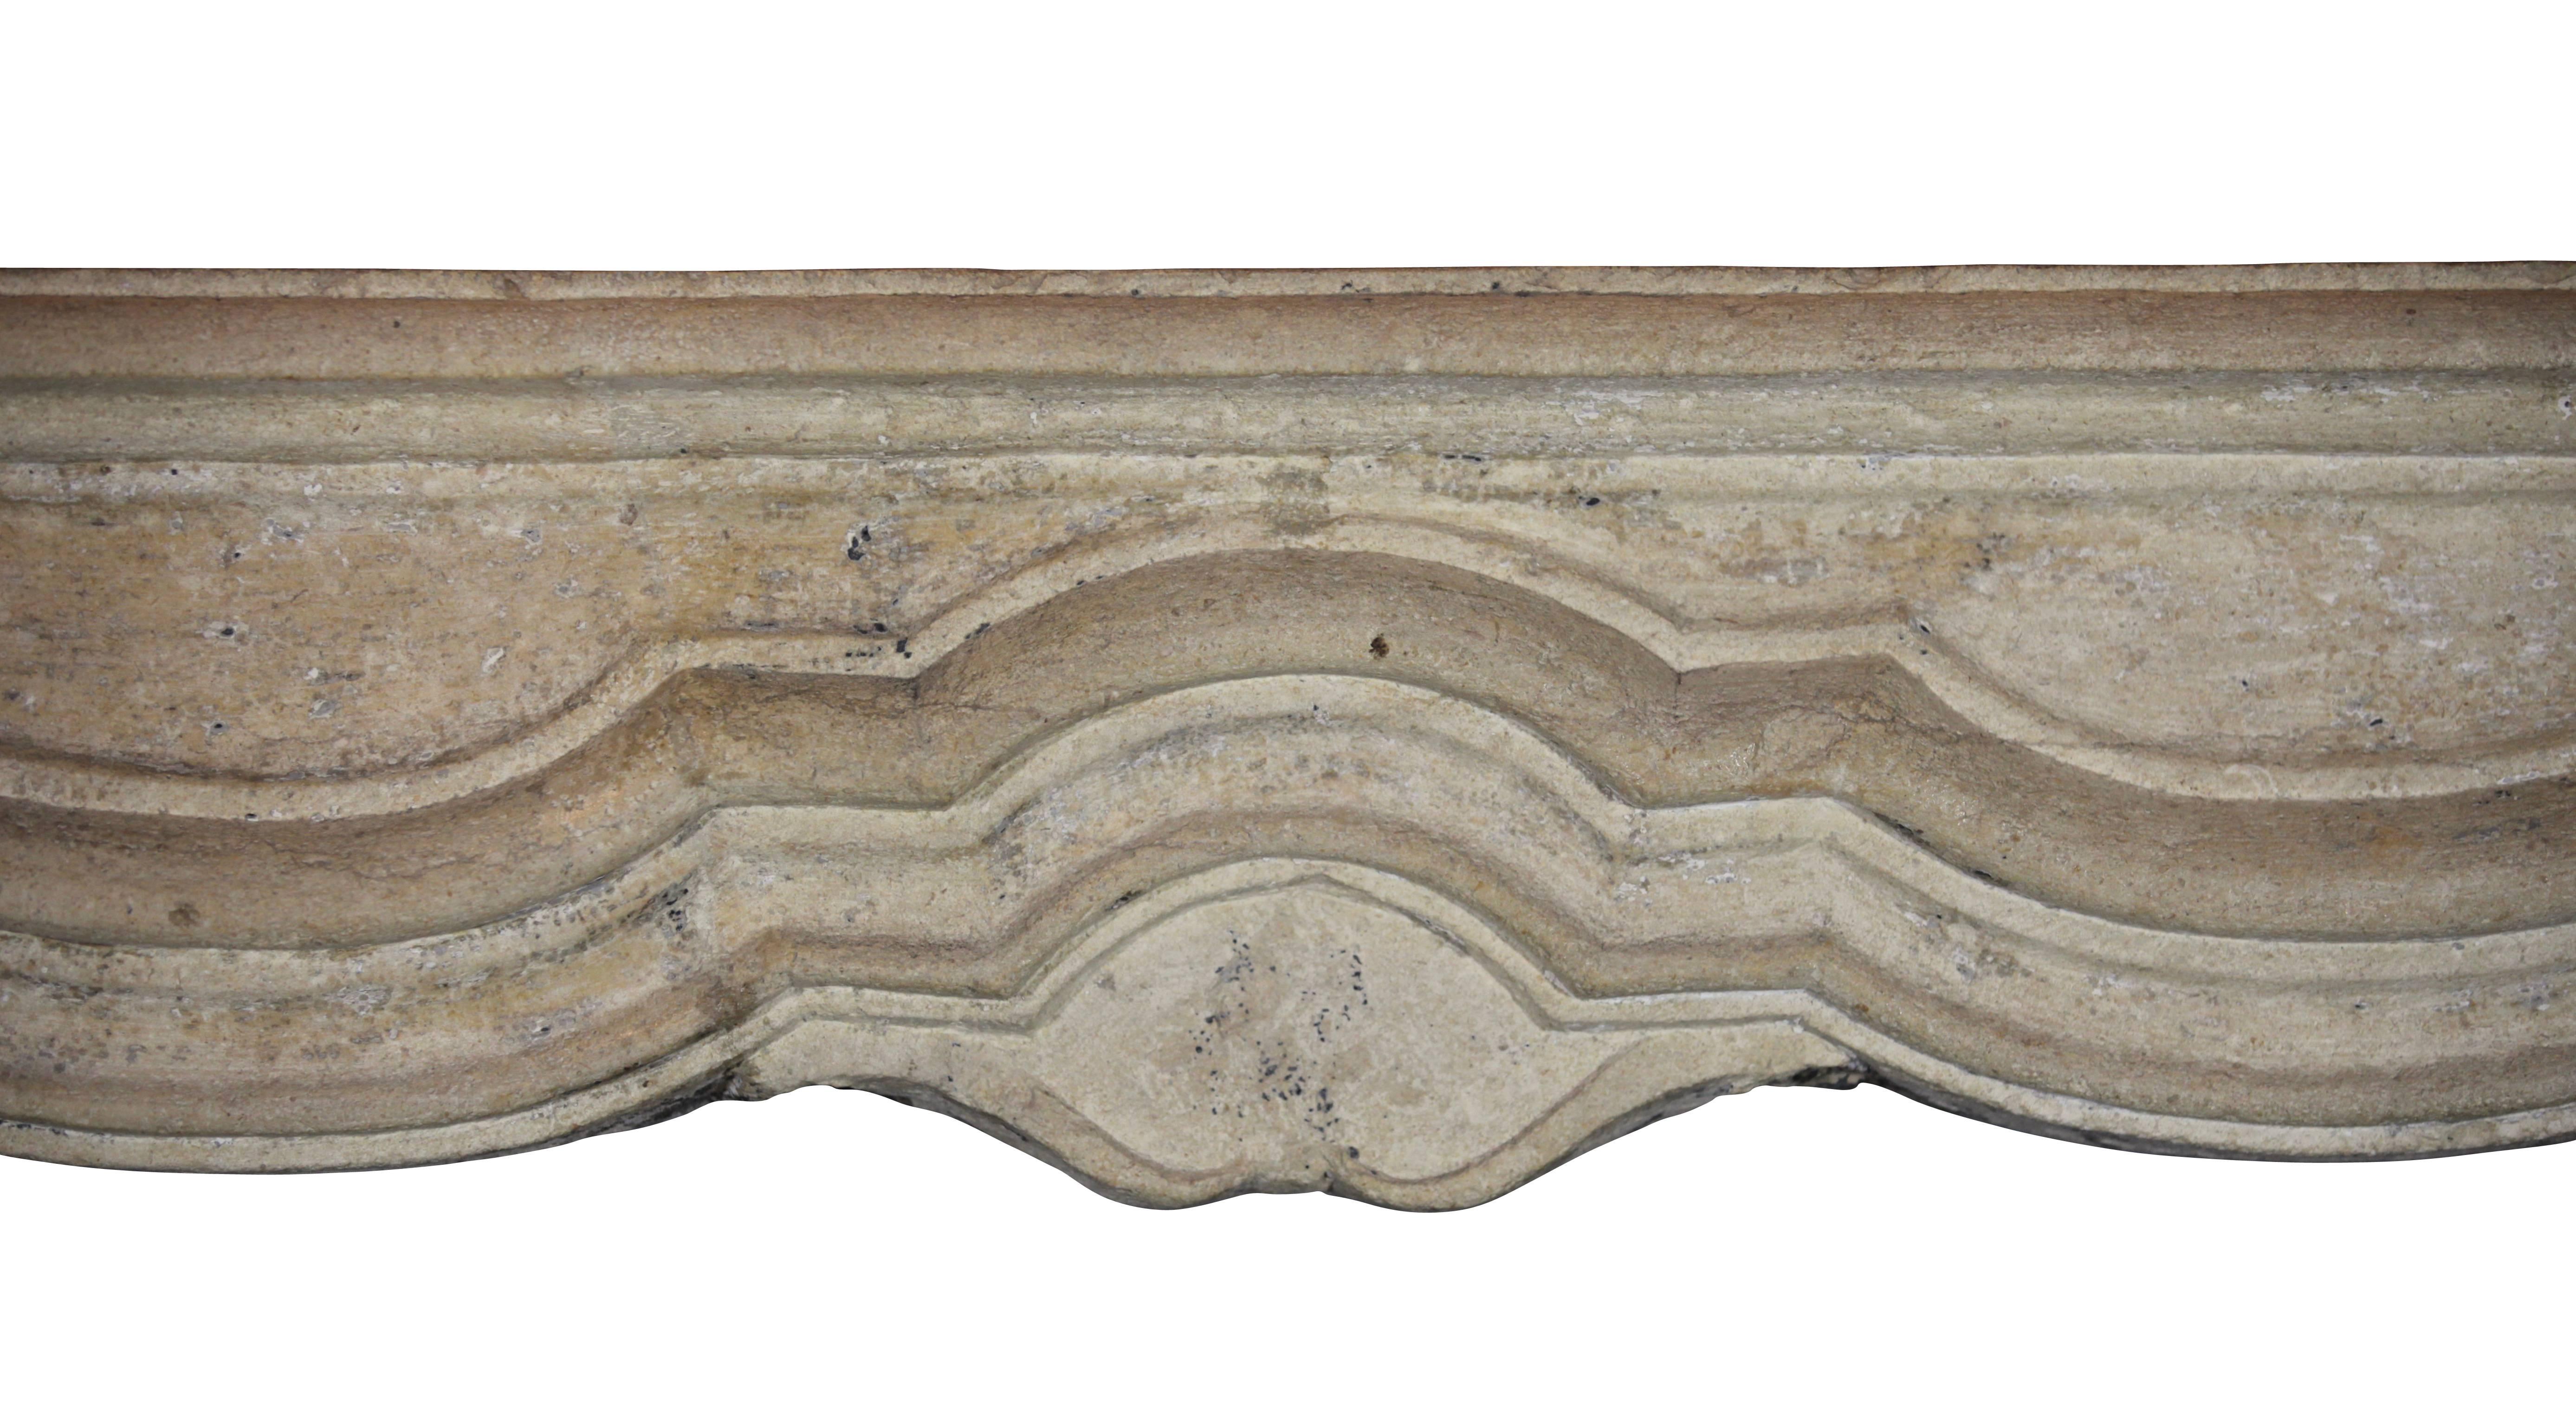 This is a wide, large, limestone antique French fireplace surround. The floral details of the carving is quite easy on the eye. The quality of the limestone is high. The ancient surfaces has been waxed. This French rustic fireplace reflects the